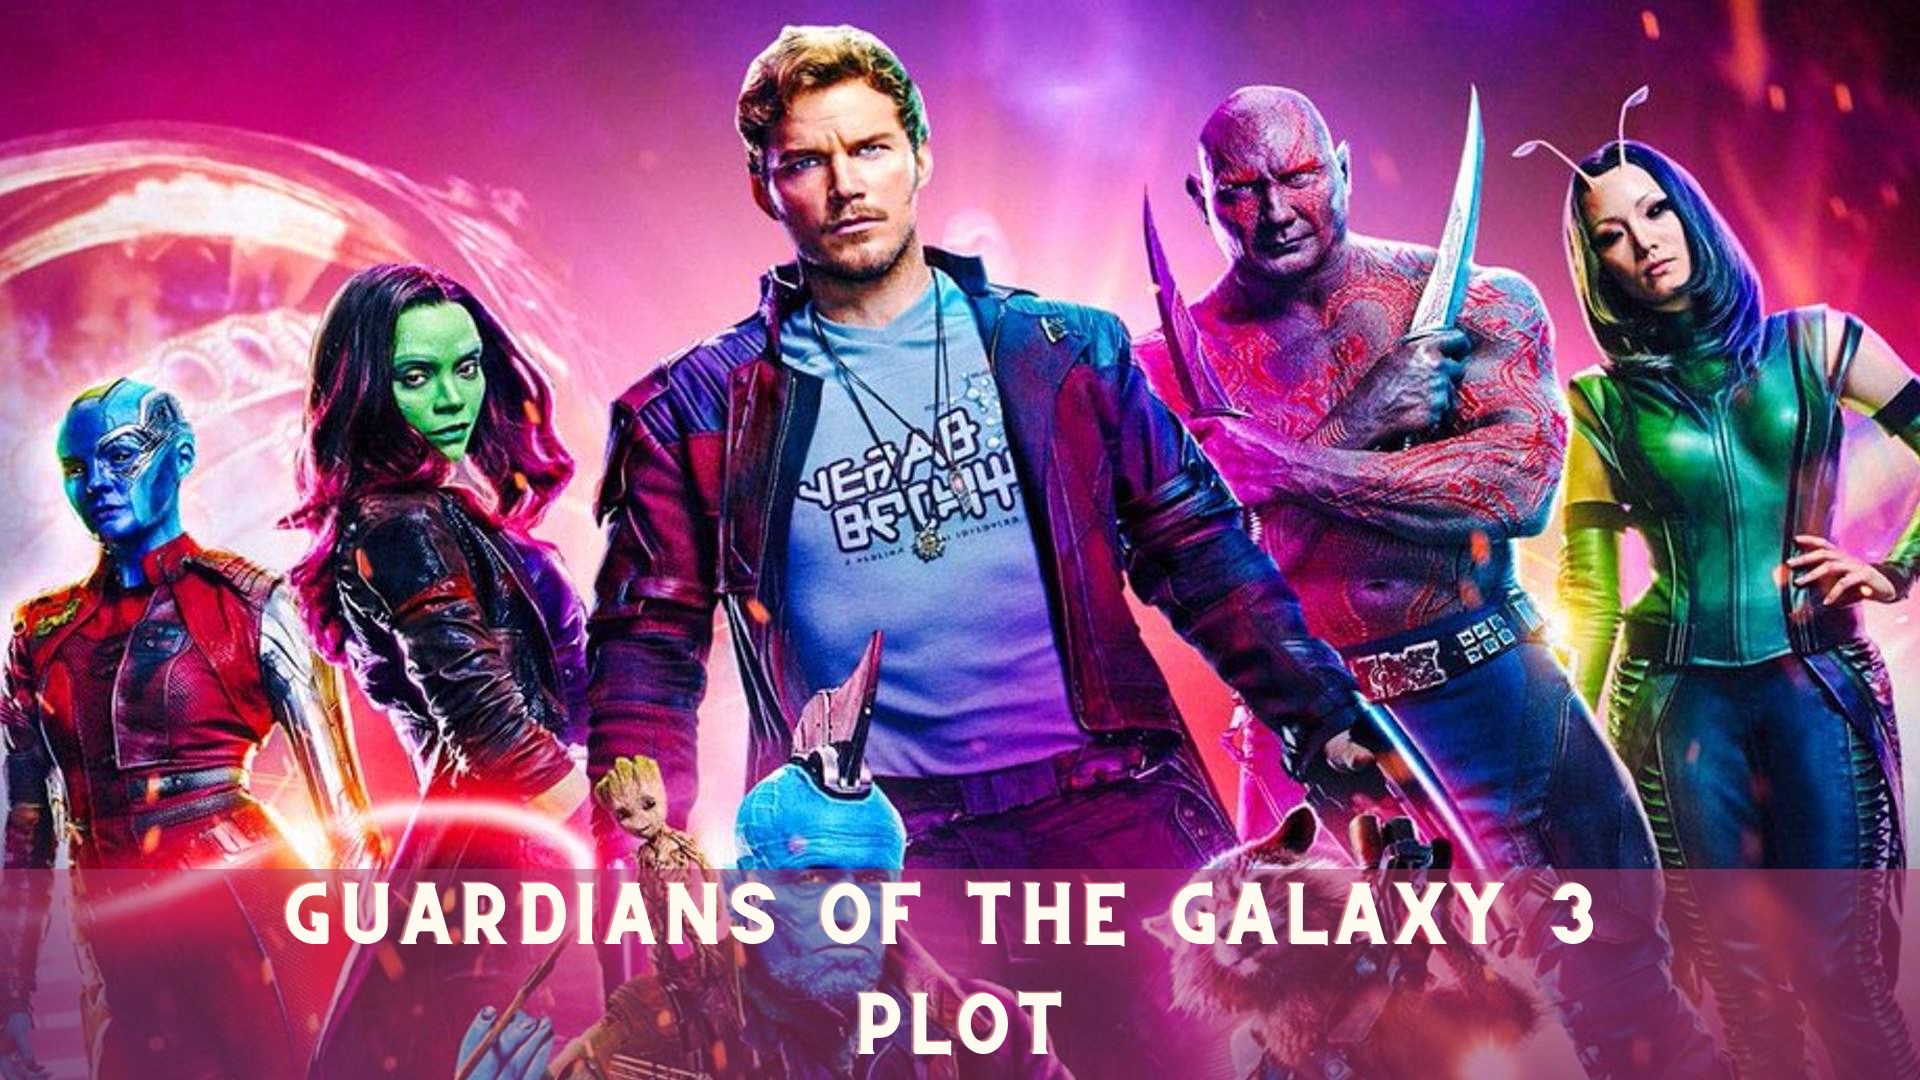 Guardians of the Galaxy 3 Plot